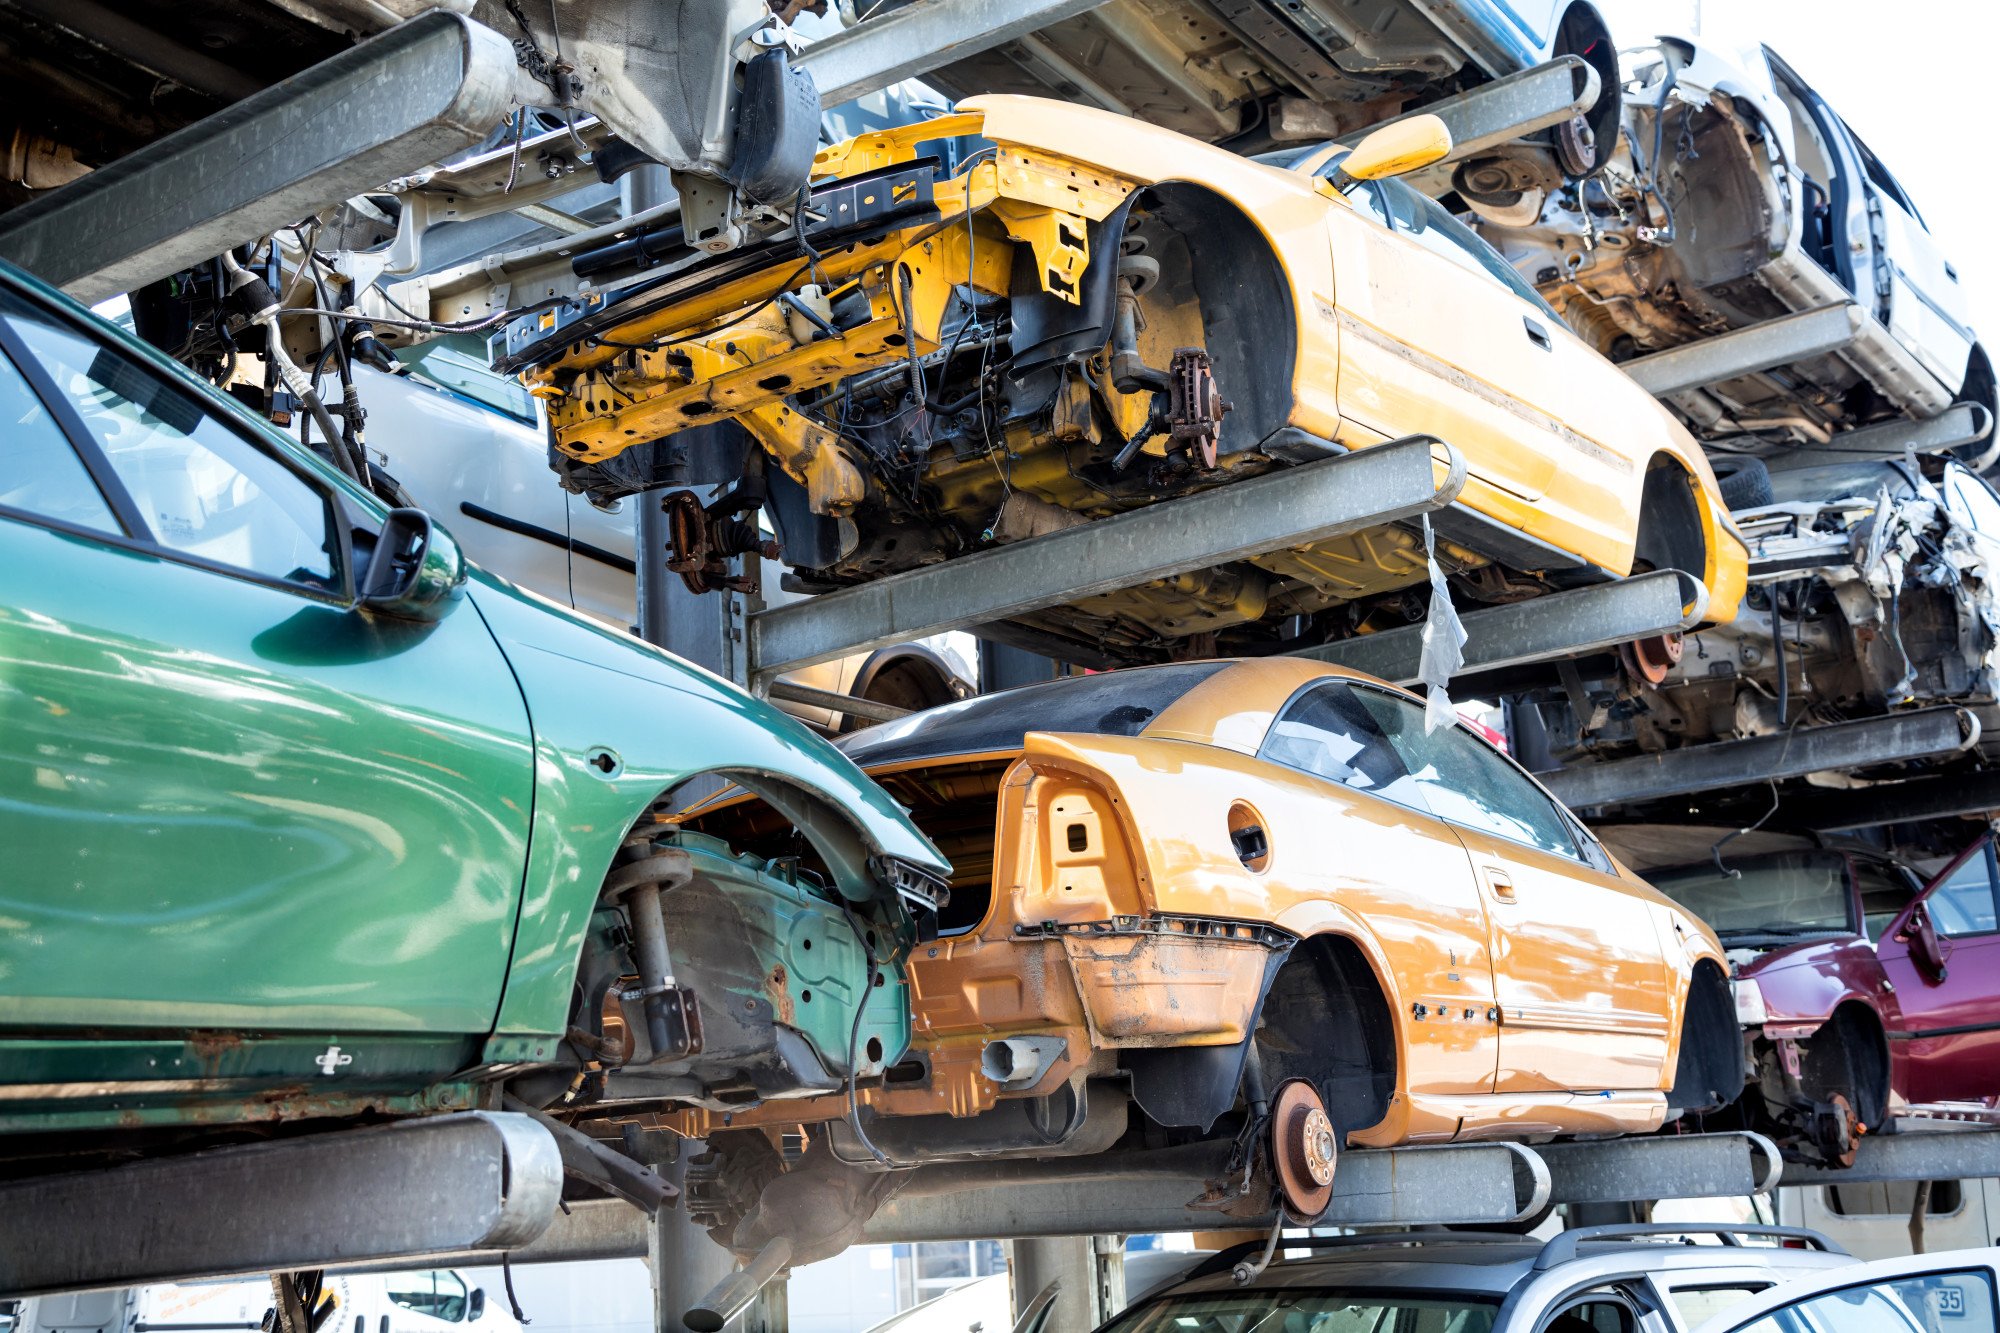 5 Things to Know Before Scrapping a Car